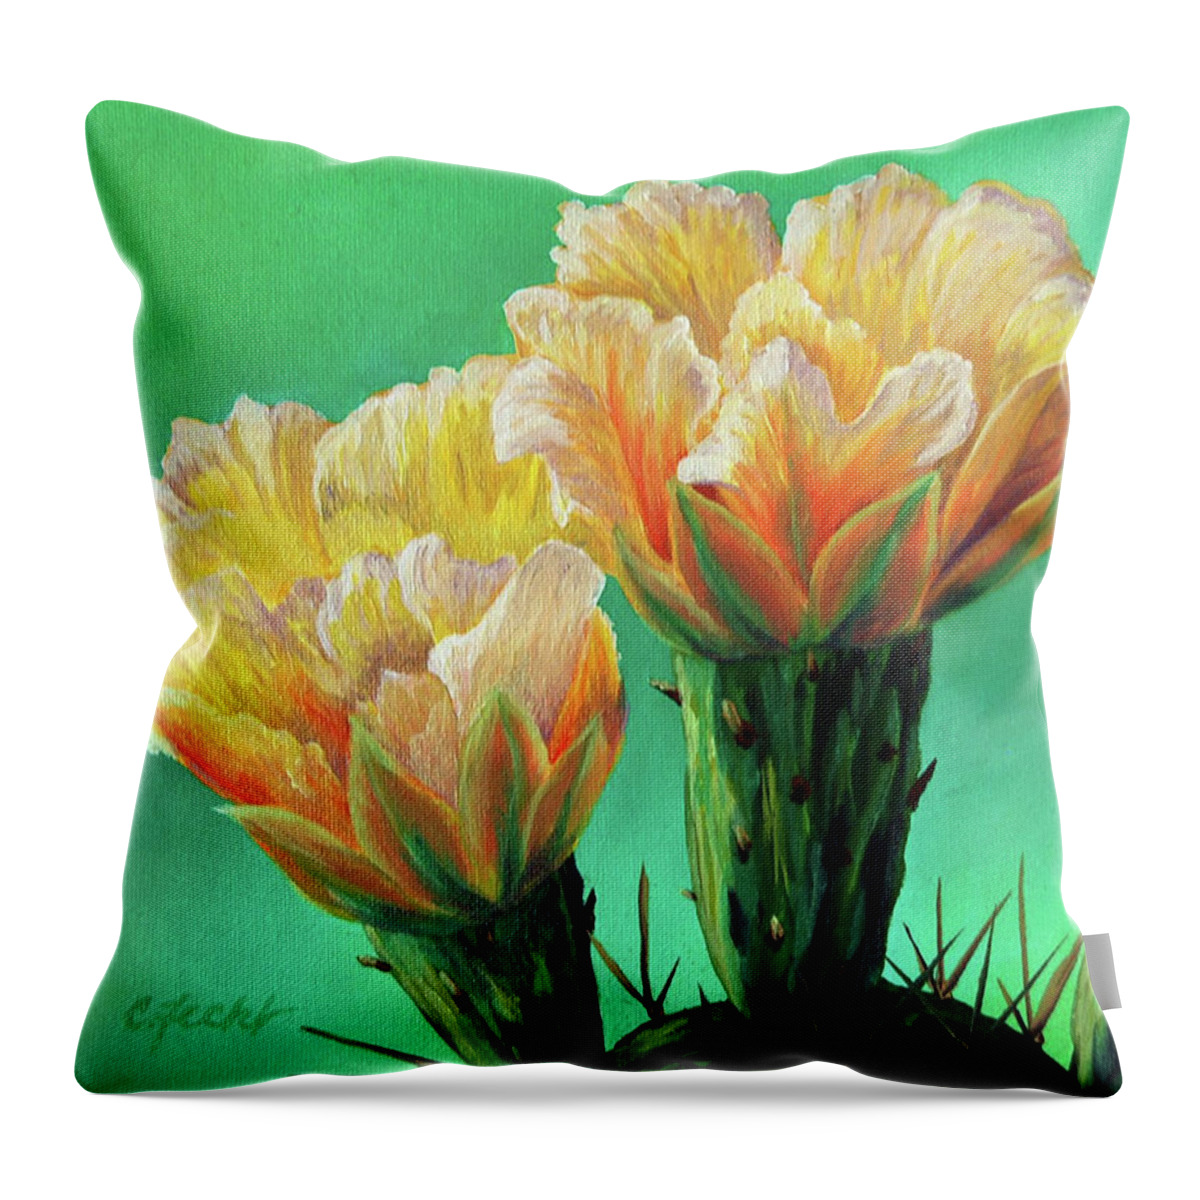 Flower Throw Pillow featuring the painting Prickly Pear Buds by Cheryl Fecht